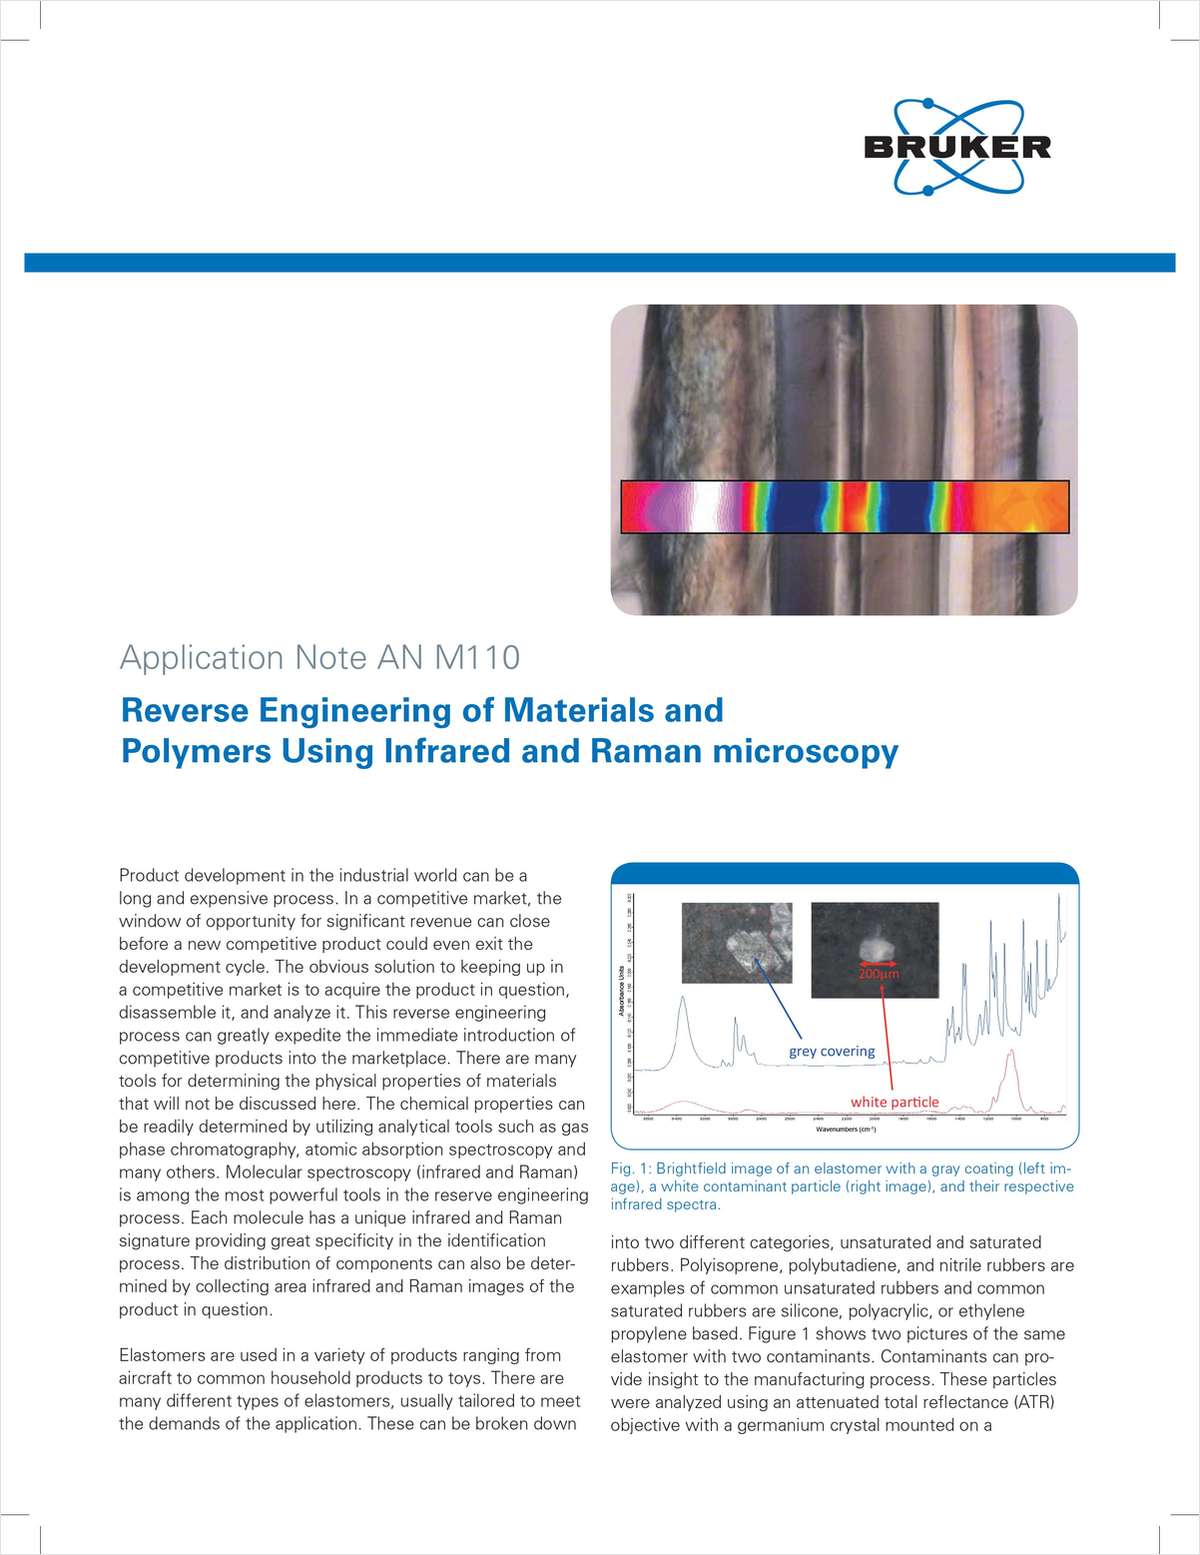 Reverse Engineering of Materials and Polymers Using Infrared and Raman Microscopy